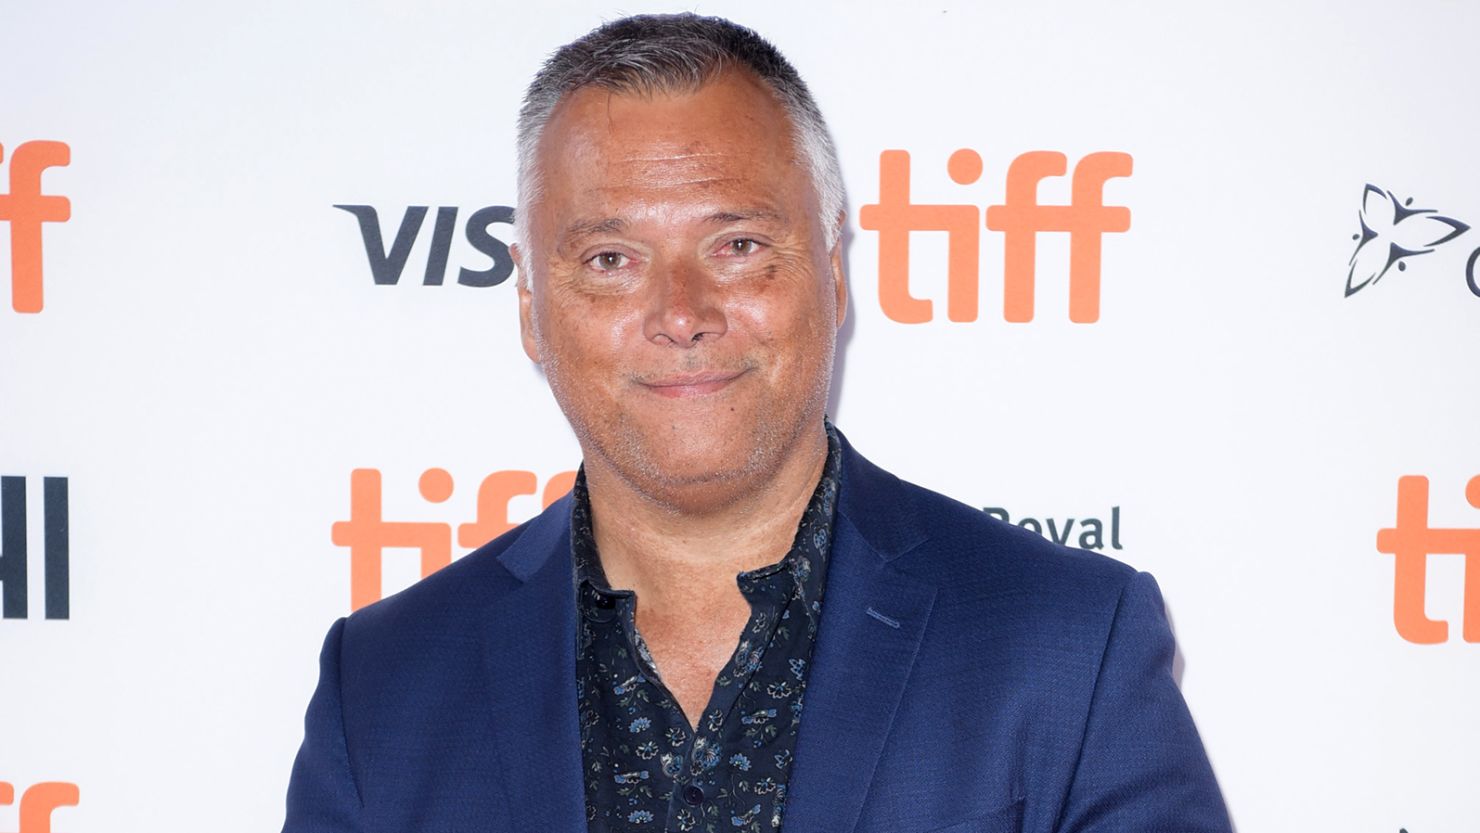 Television journalist Stan Grant attends "The Australian Dream" red carpet premiere during the 2019 Toronto International Film Festival at Ryerson Theatre on September 08, 2019 in Toronto, Canada. 